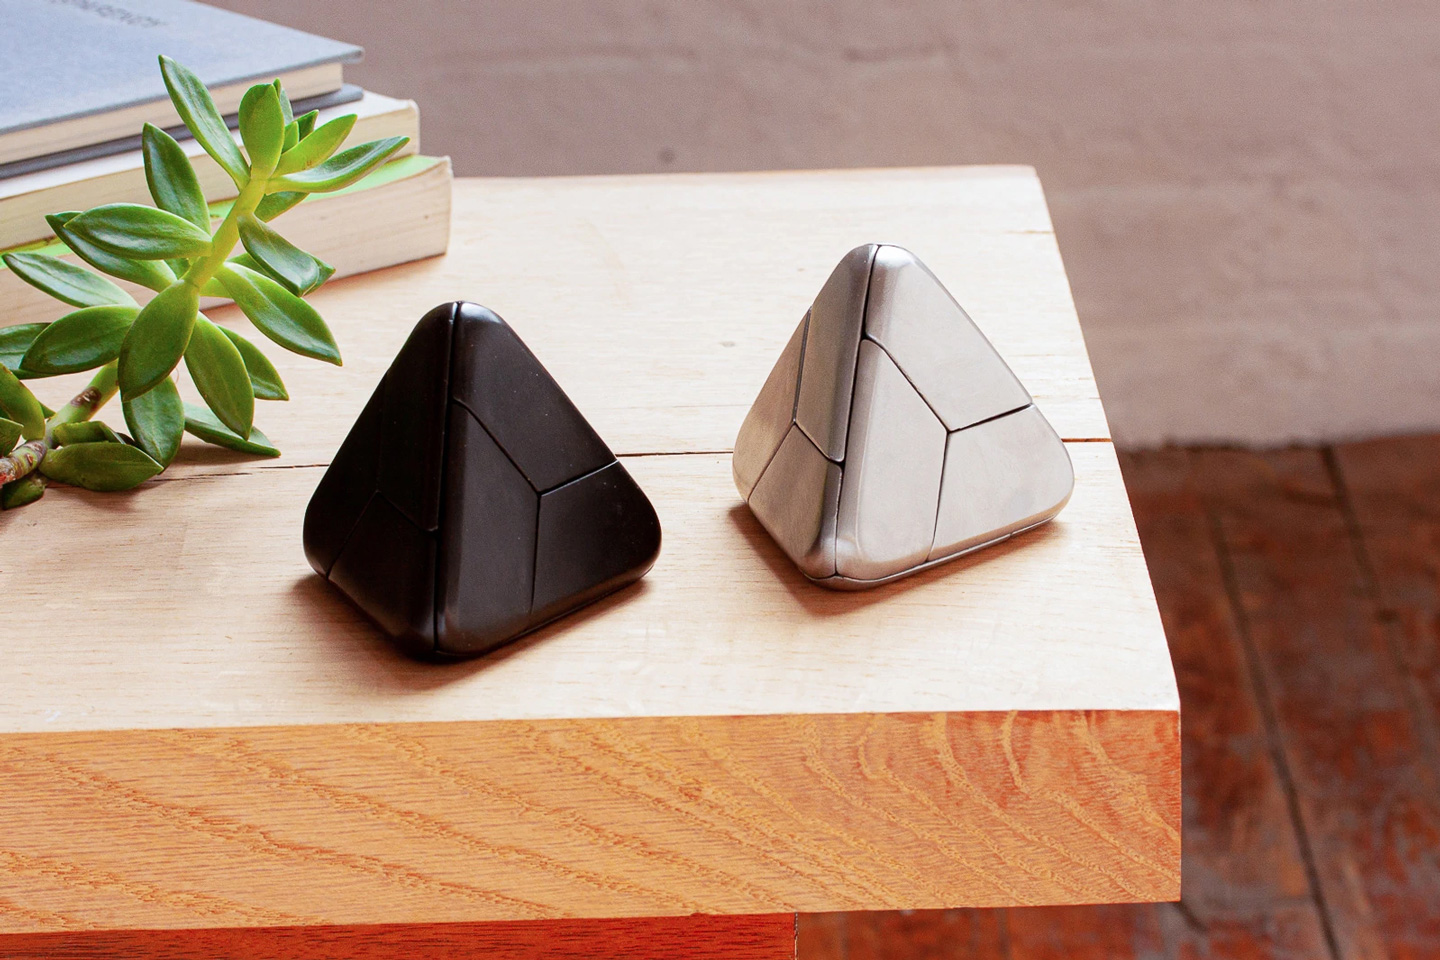 Craighill Tetra is a fidget toy for your hands and your brain 